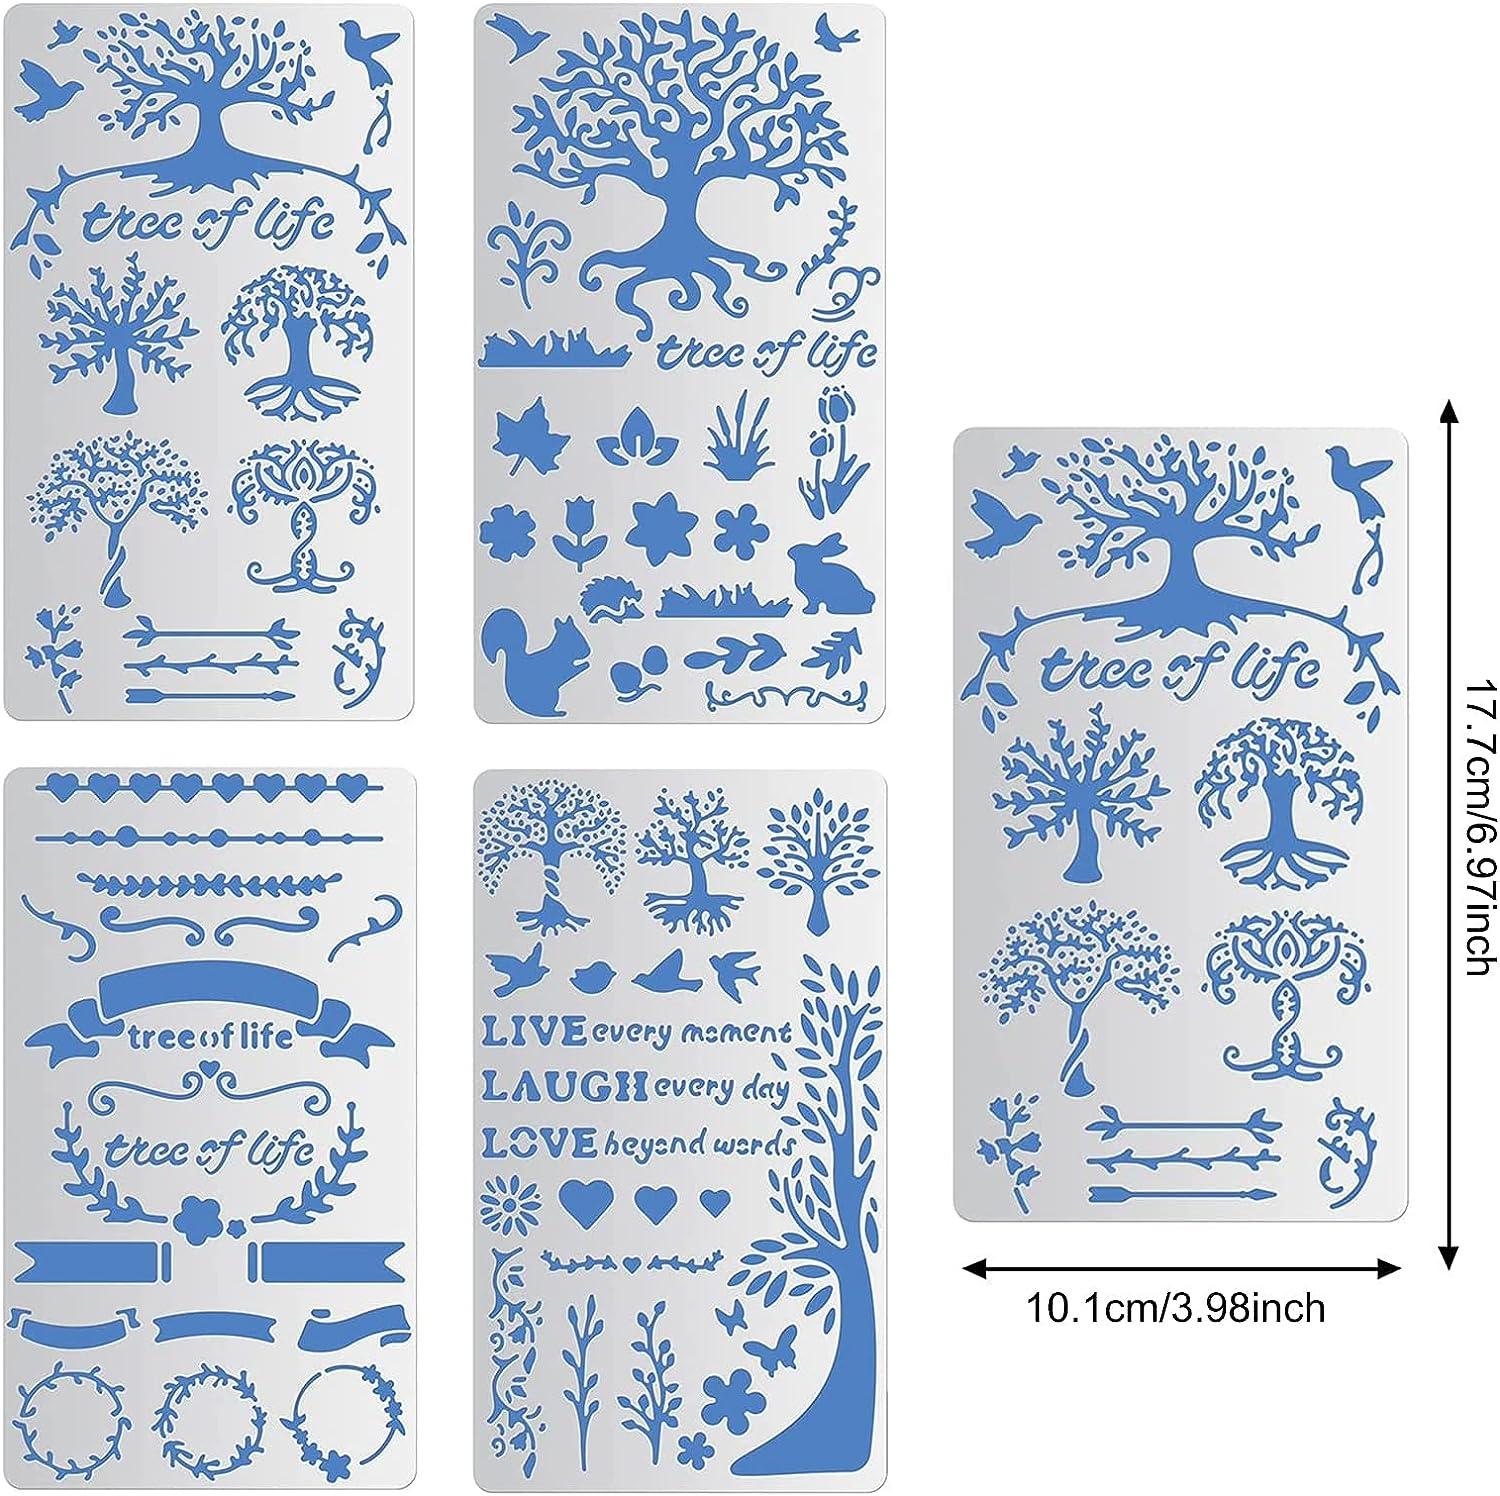 BENECREAT 4PCS 4x7 Inch Tree of Life Metal Stencils Templates for Wood  Carving, Drawings and Woodburning, Engraving and Scrapbooking Project 